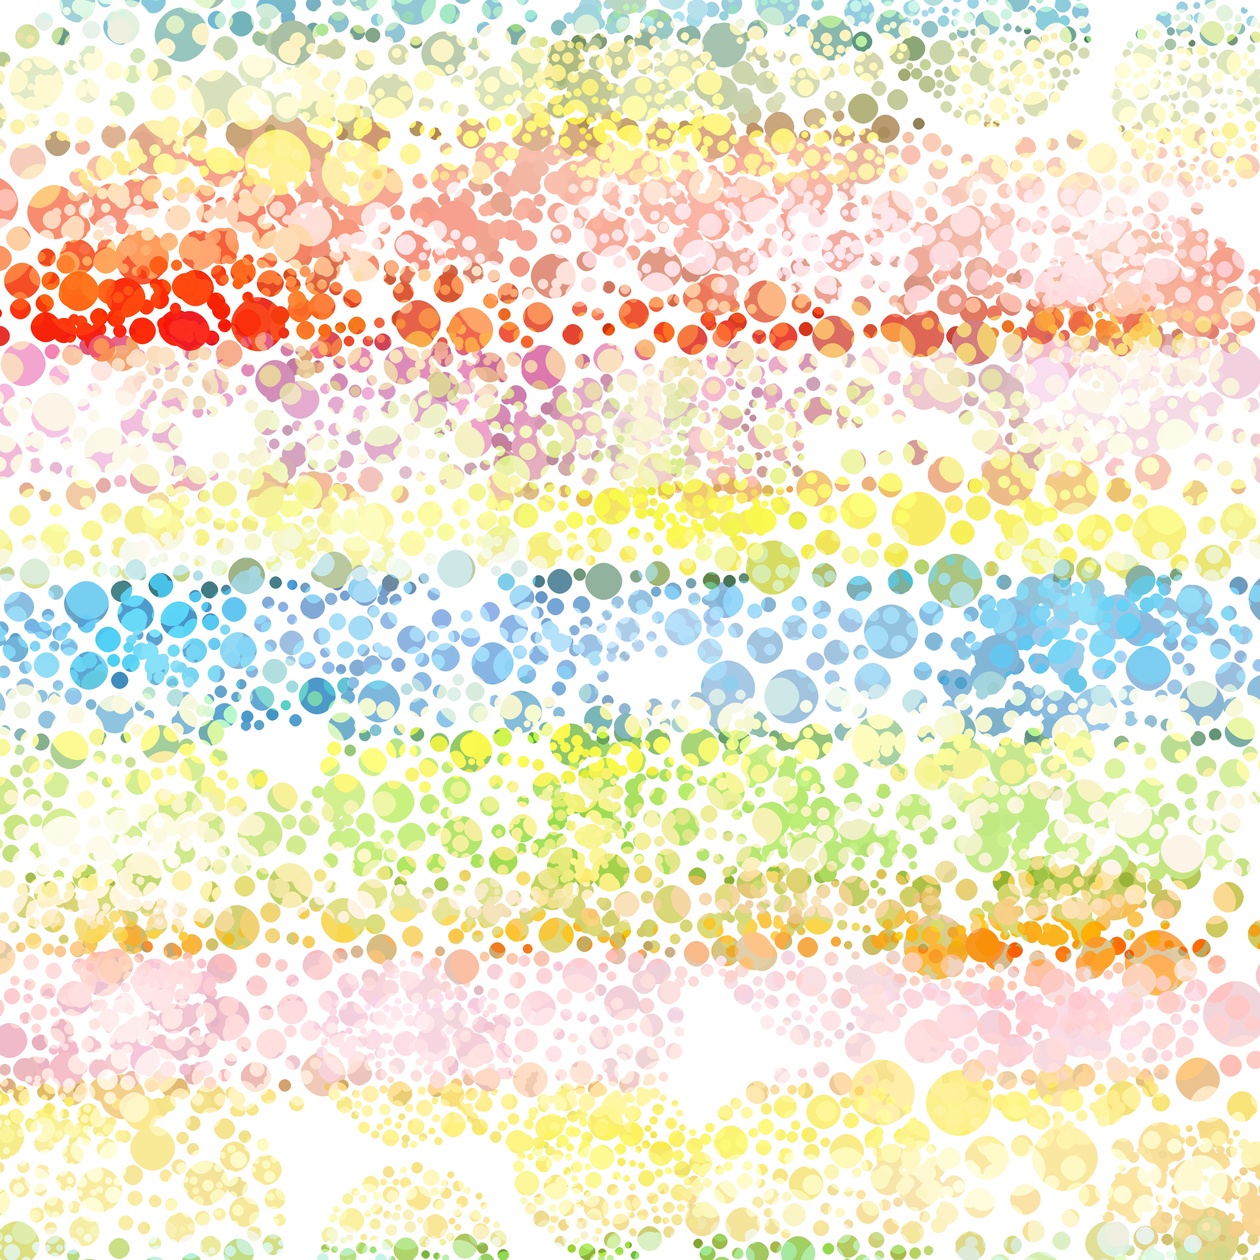 abstract colorful bubble texture background Photoshop brush